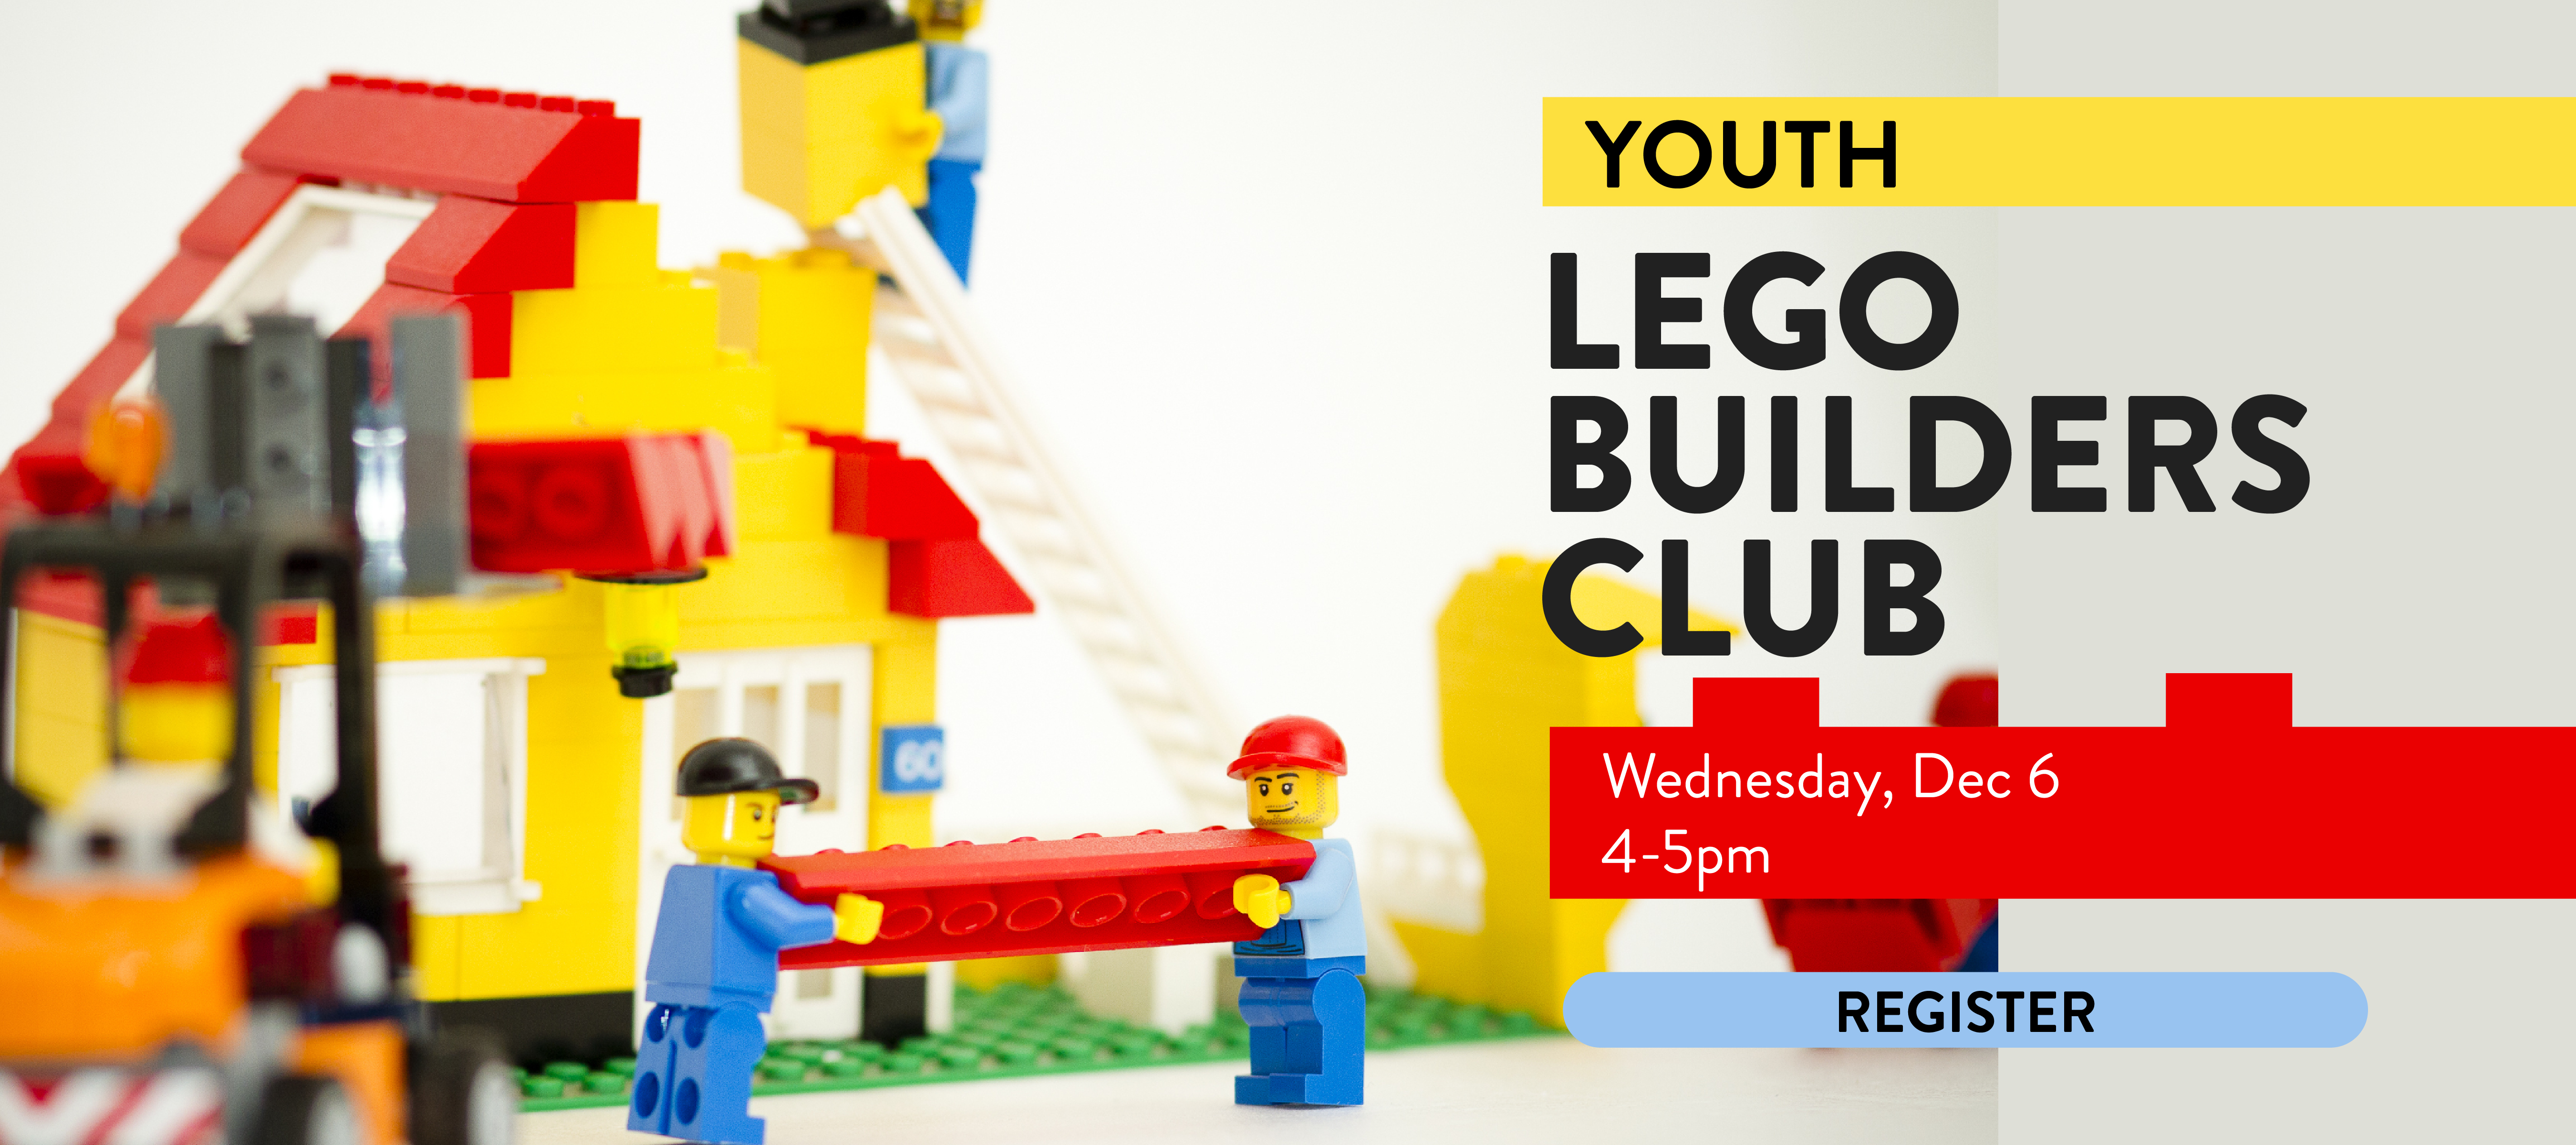 PHPL, prospect heights public library, LEGO BUILDERS CLUB